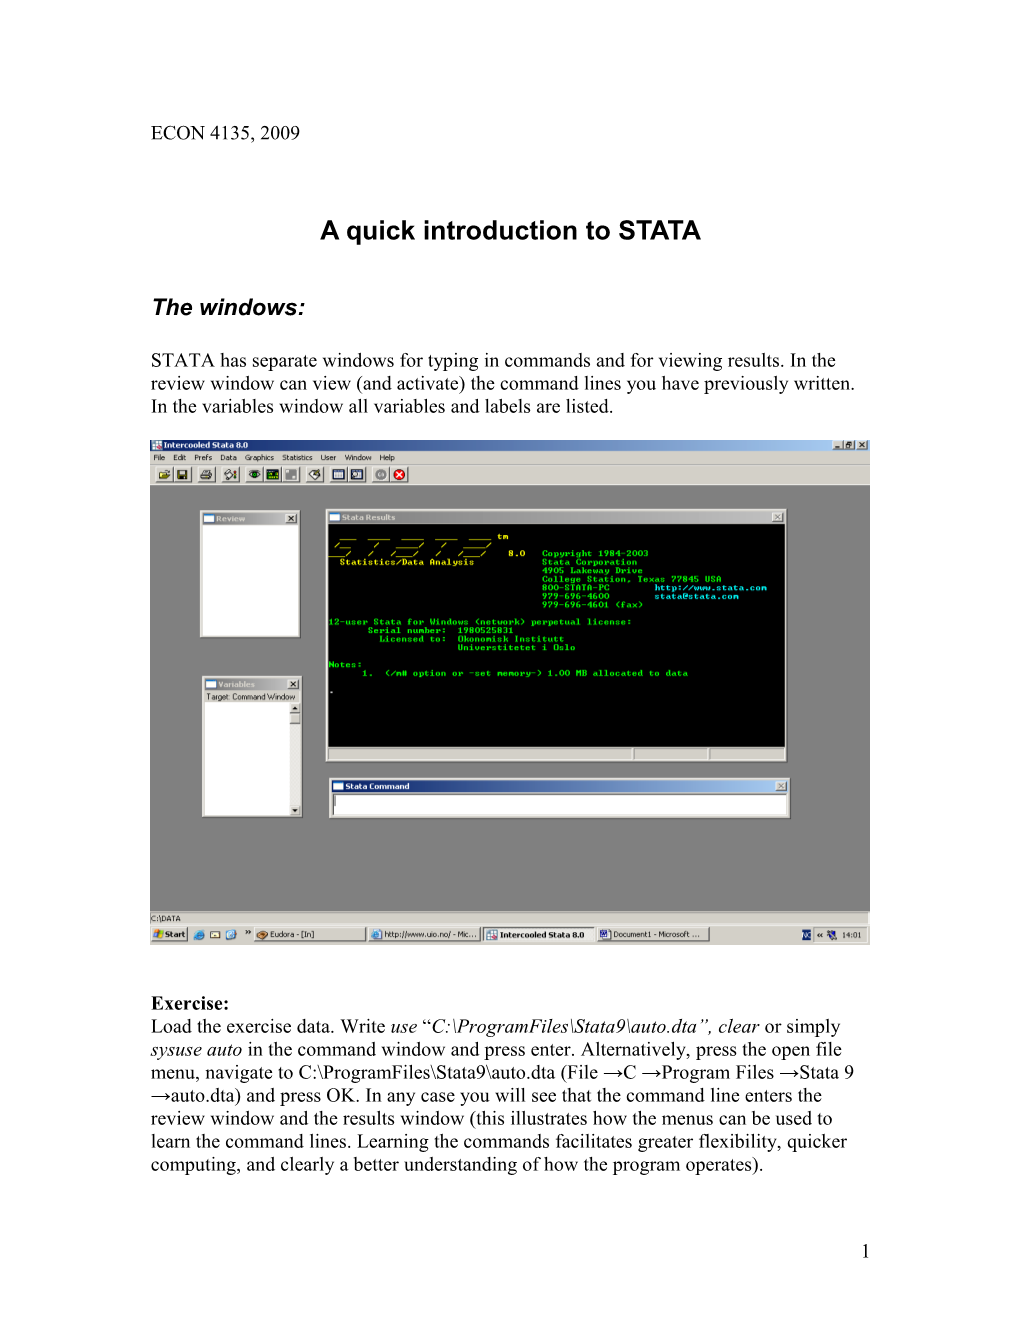 A Quick Introduction to STATA